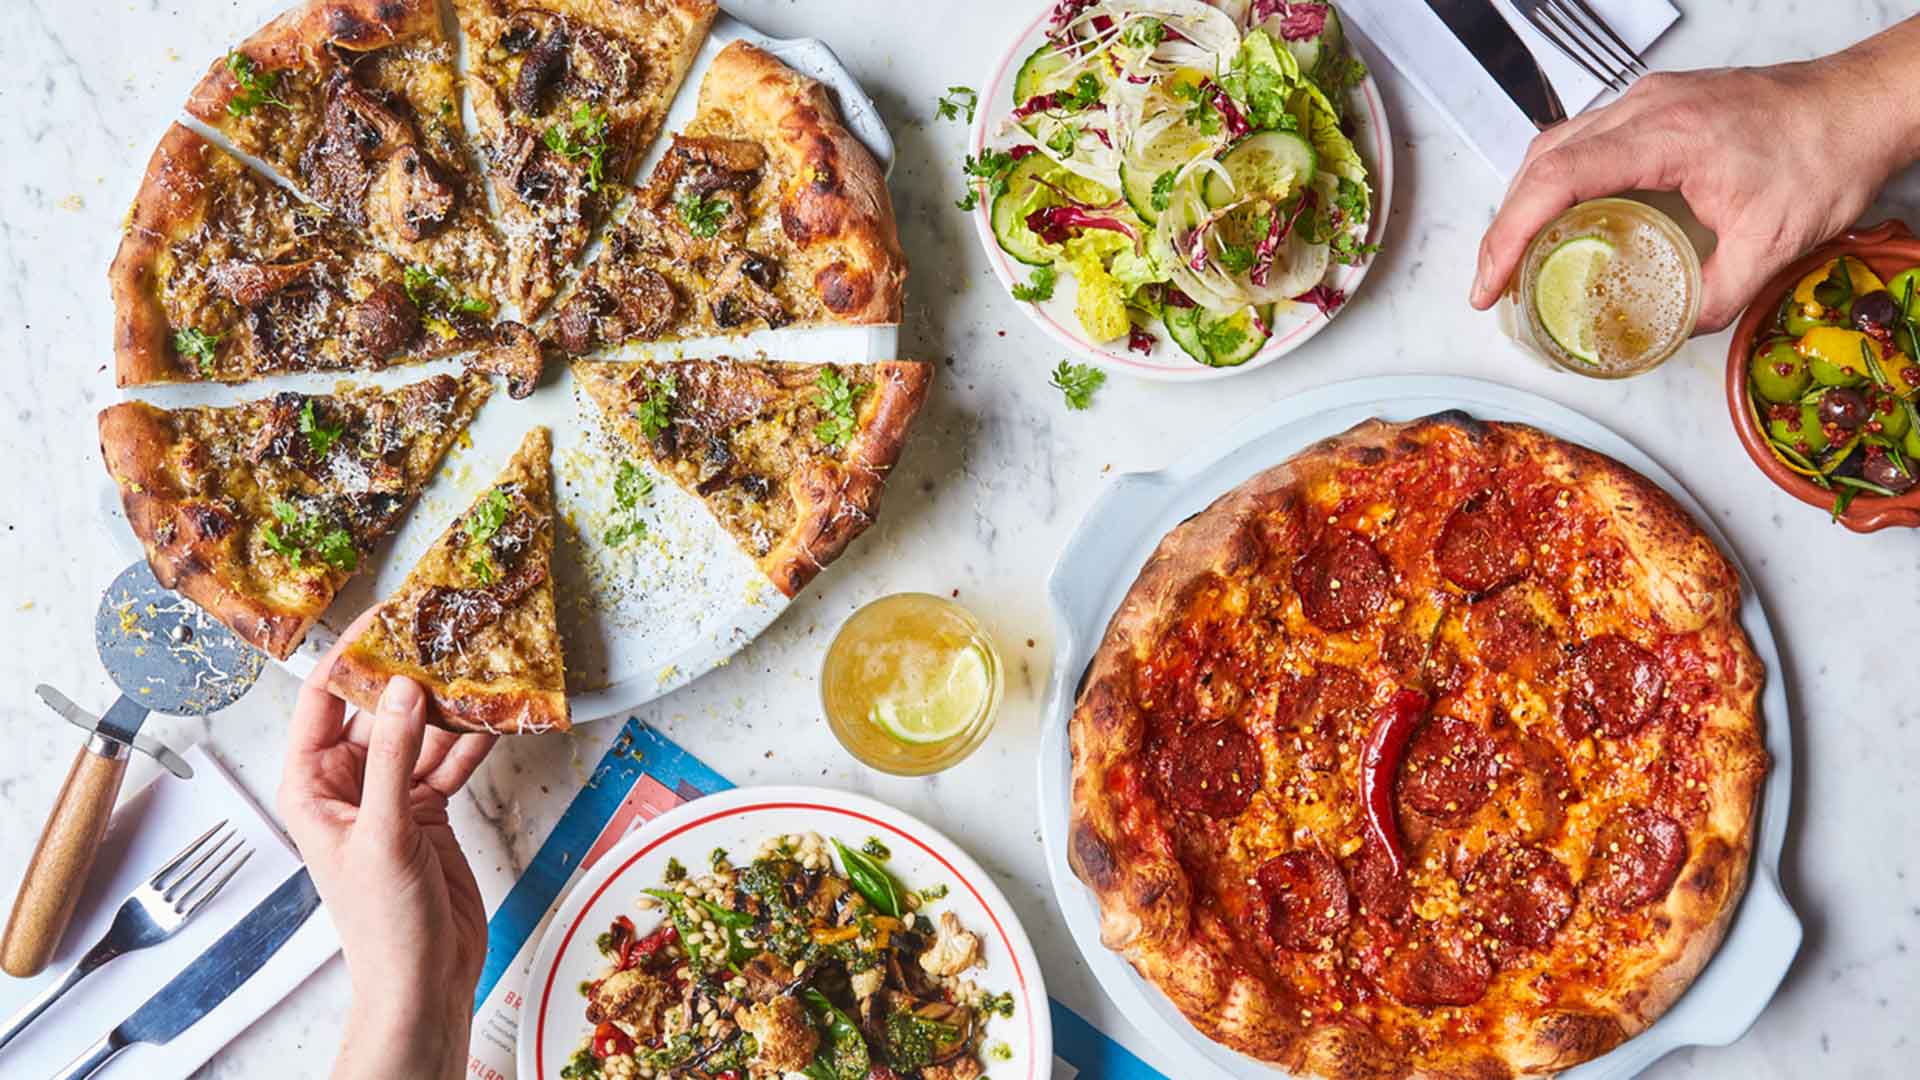 The First Australian Outpost of Jamie Oliver's Pizzeria Is Opening on the Gold Coast